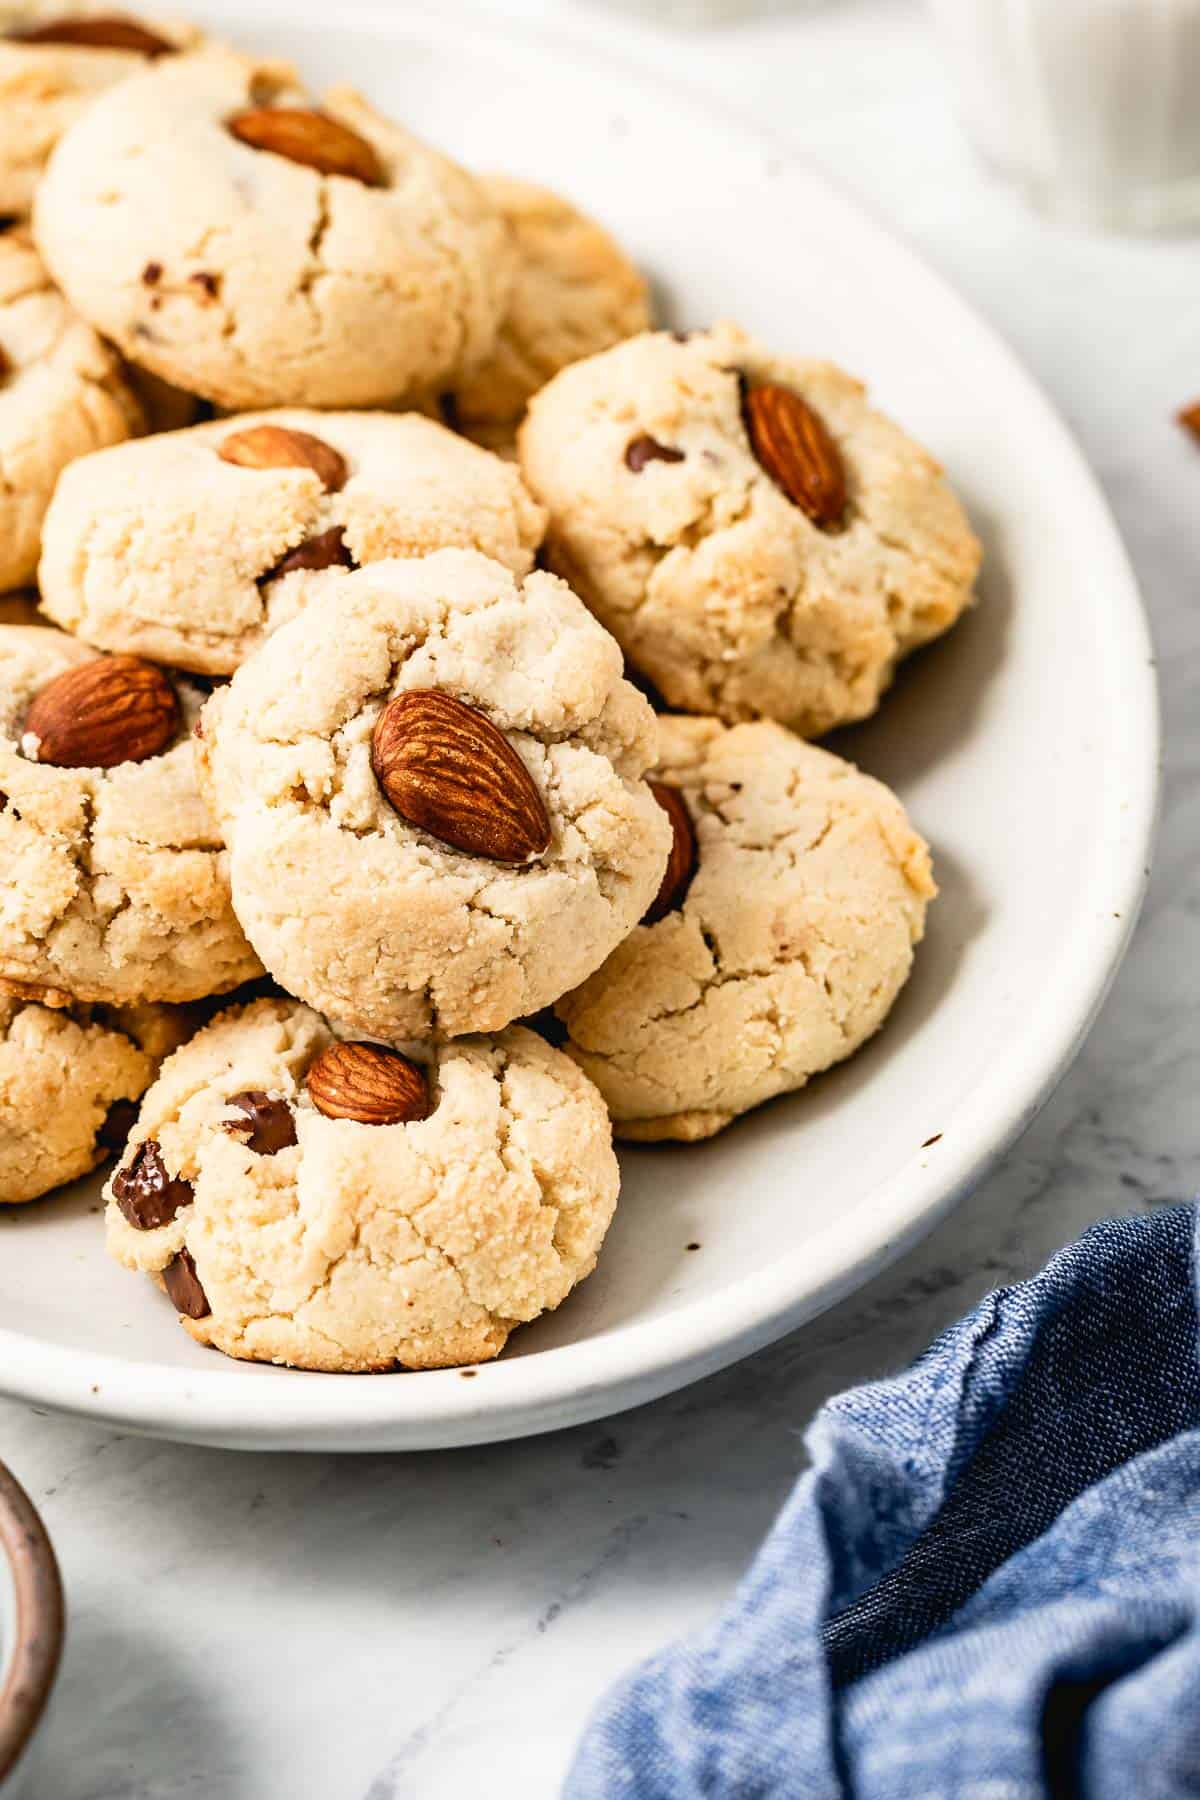 almond flour cookies with chocolate chips (Healthy, vegan and gluten free) are photographed from the front view on a plate.